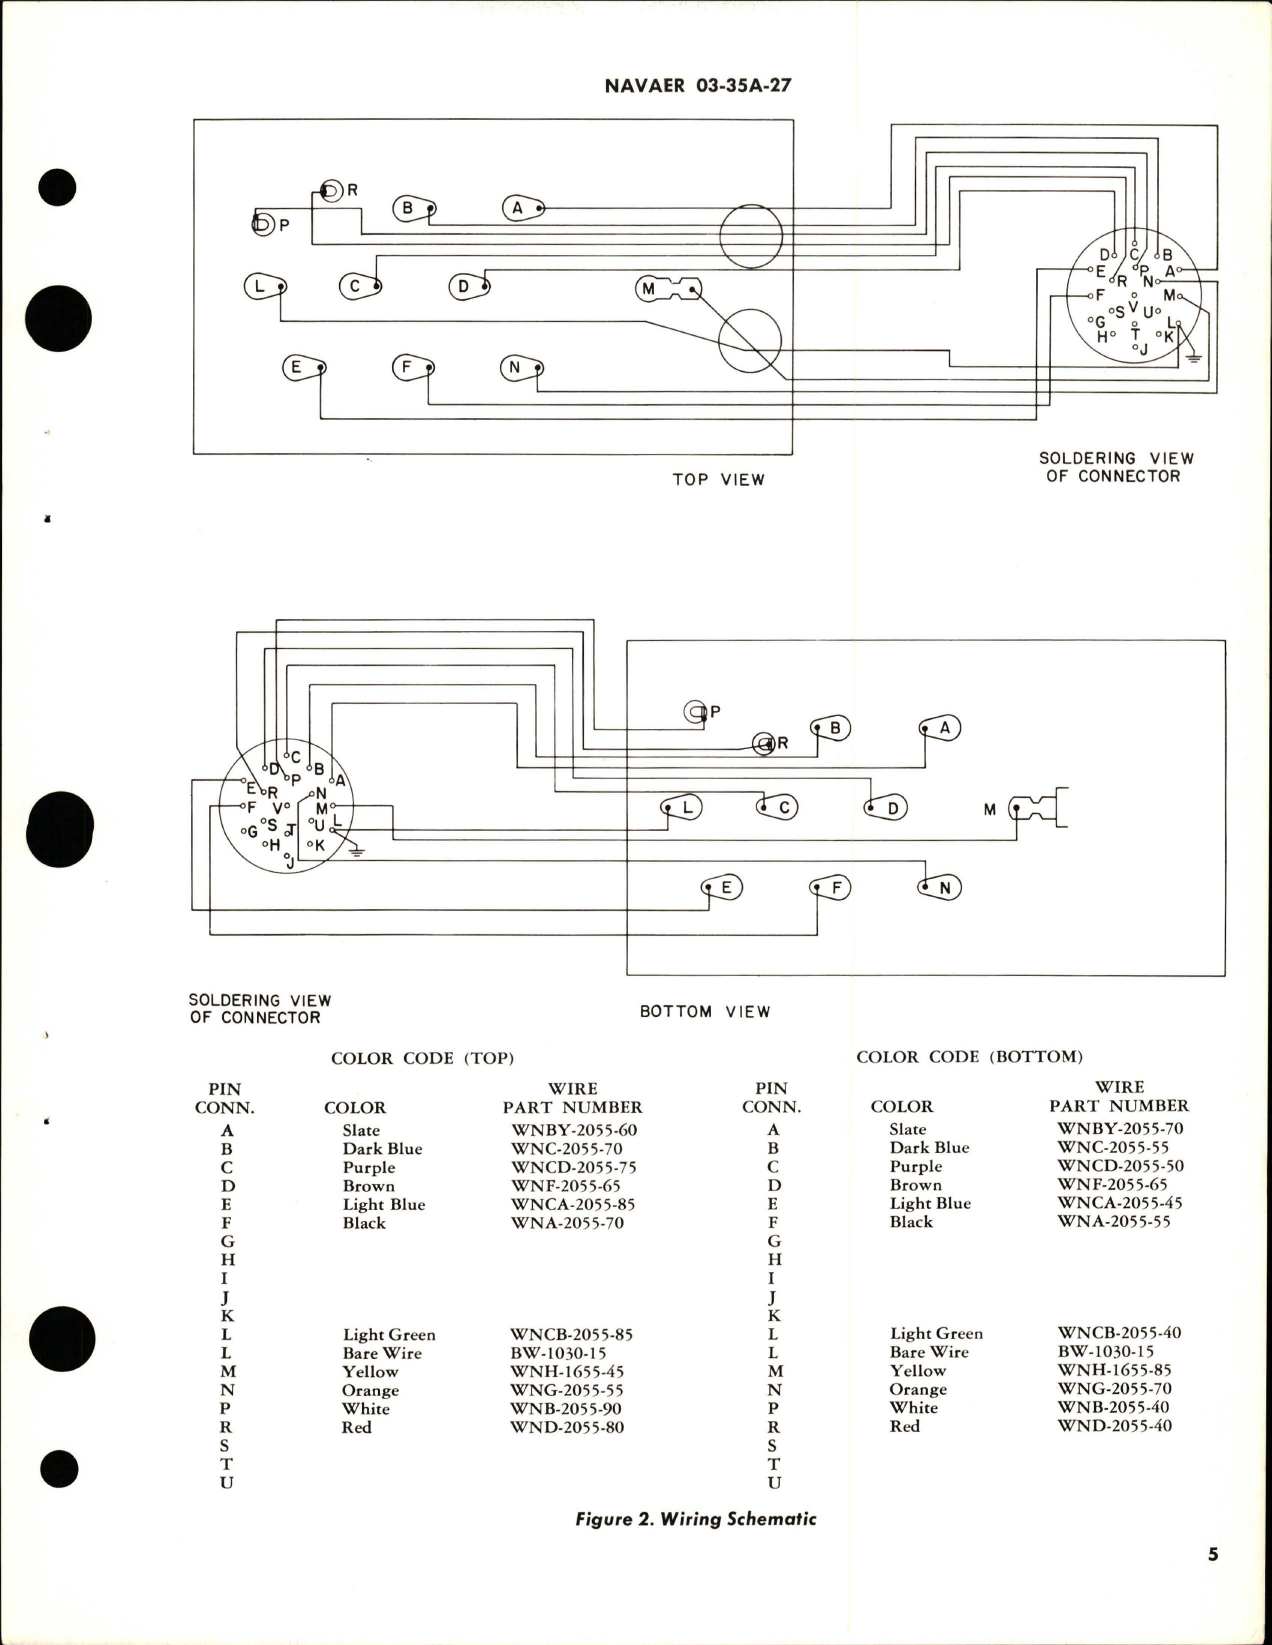 Sample page 5 from AirCorps Library document: Overhaul Instructions with Parts Breakdown for Radio Noise Filter - 45E02-1-A